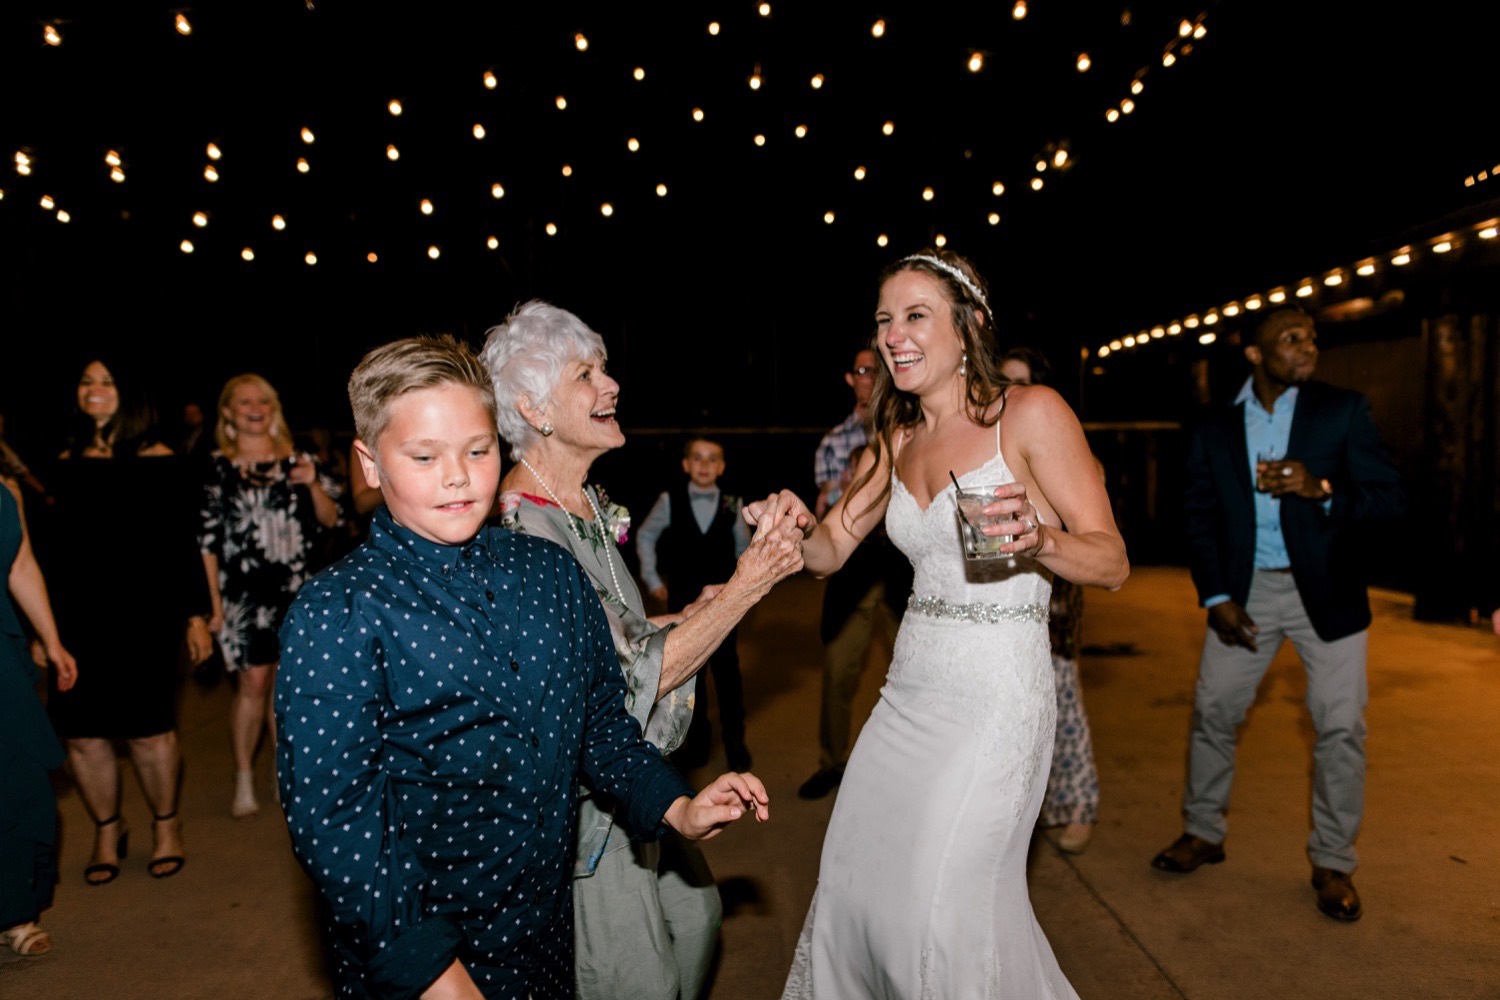 Kristen, the bride, dances with guests at Spruce Mountain Ranch in Larkspur, Colorado.